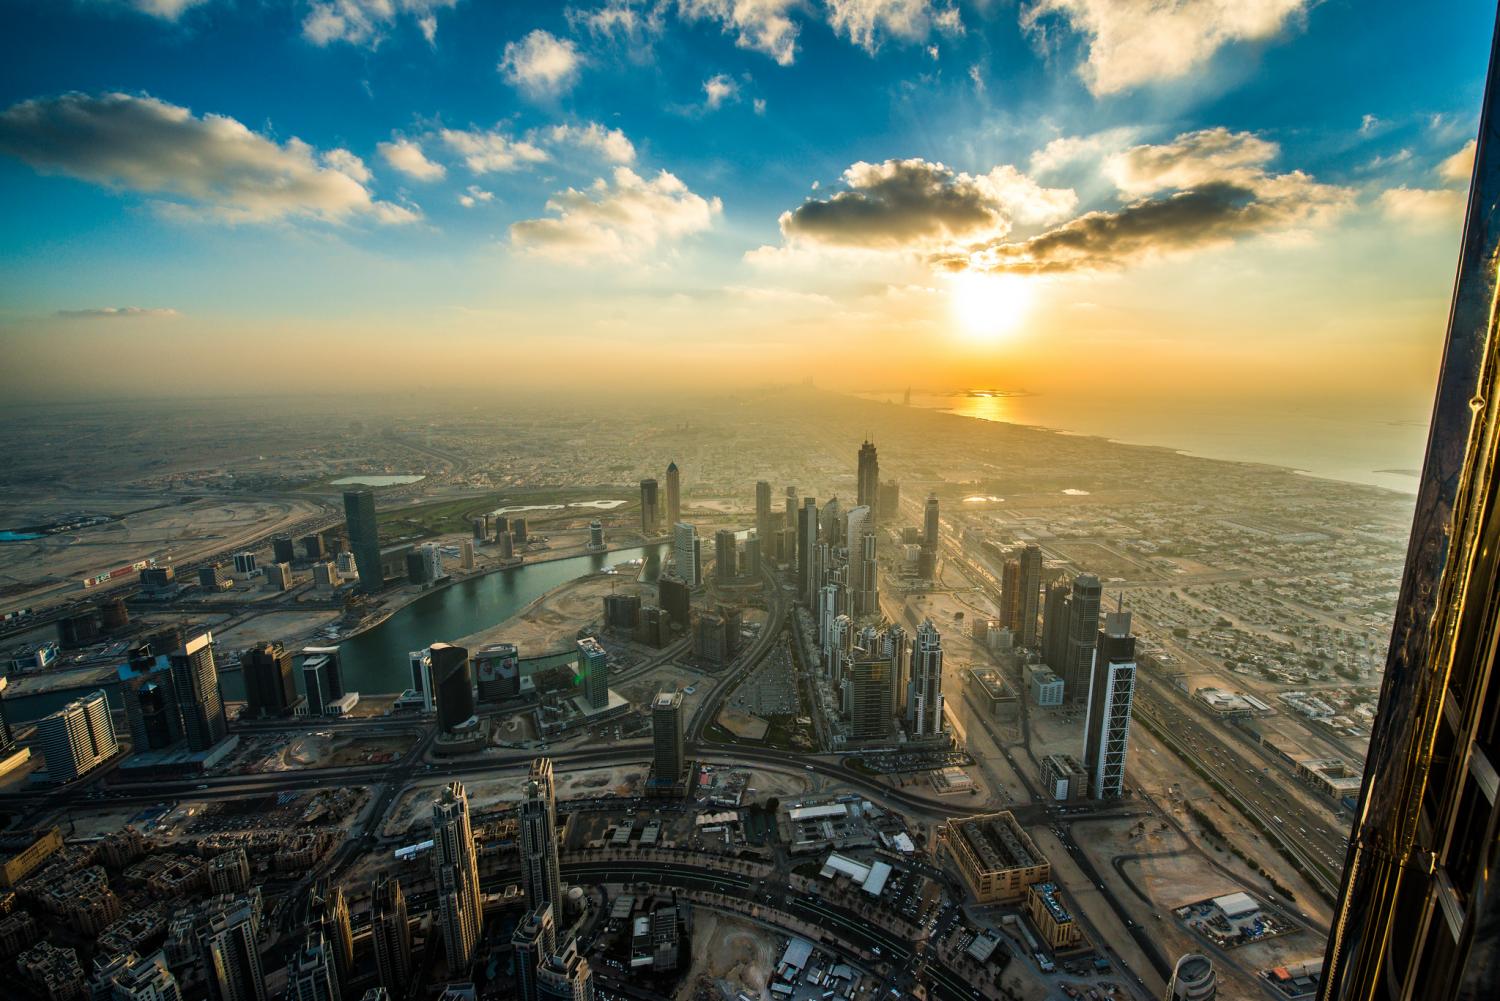 As Expo 2020 approaches, Dubai insists clean technologies such as hydrogen-powered fuel cells are in its future.